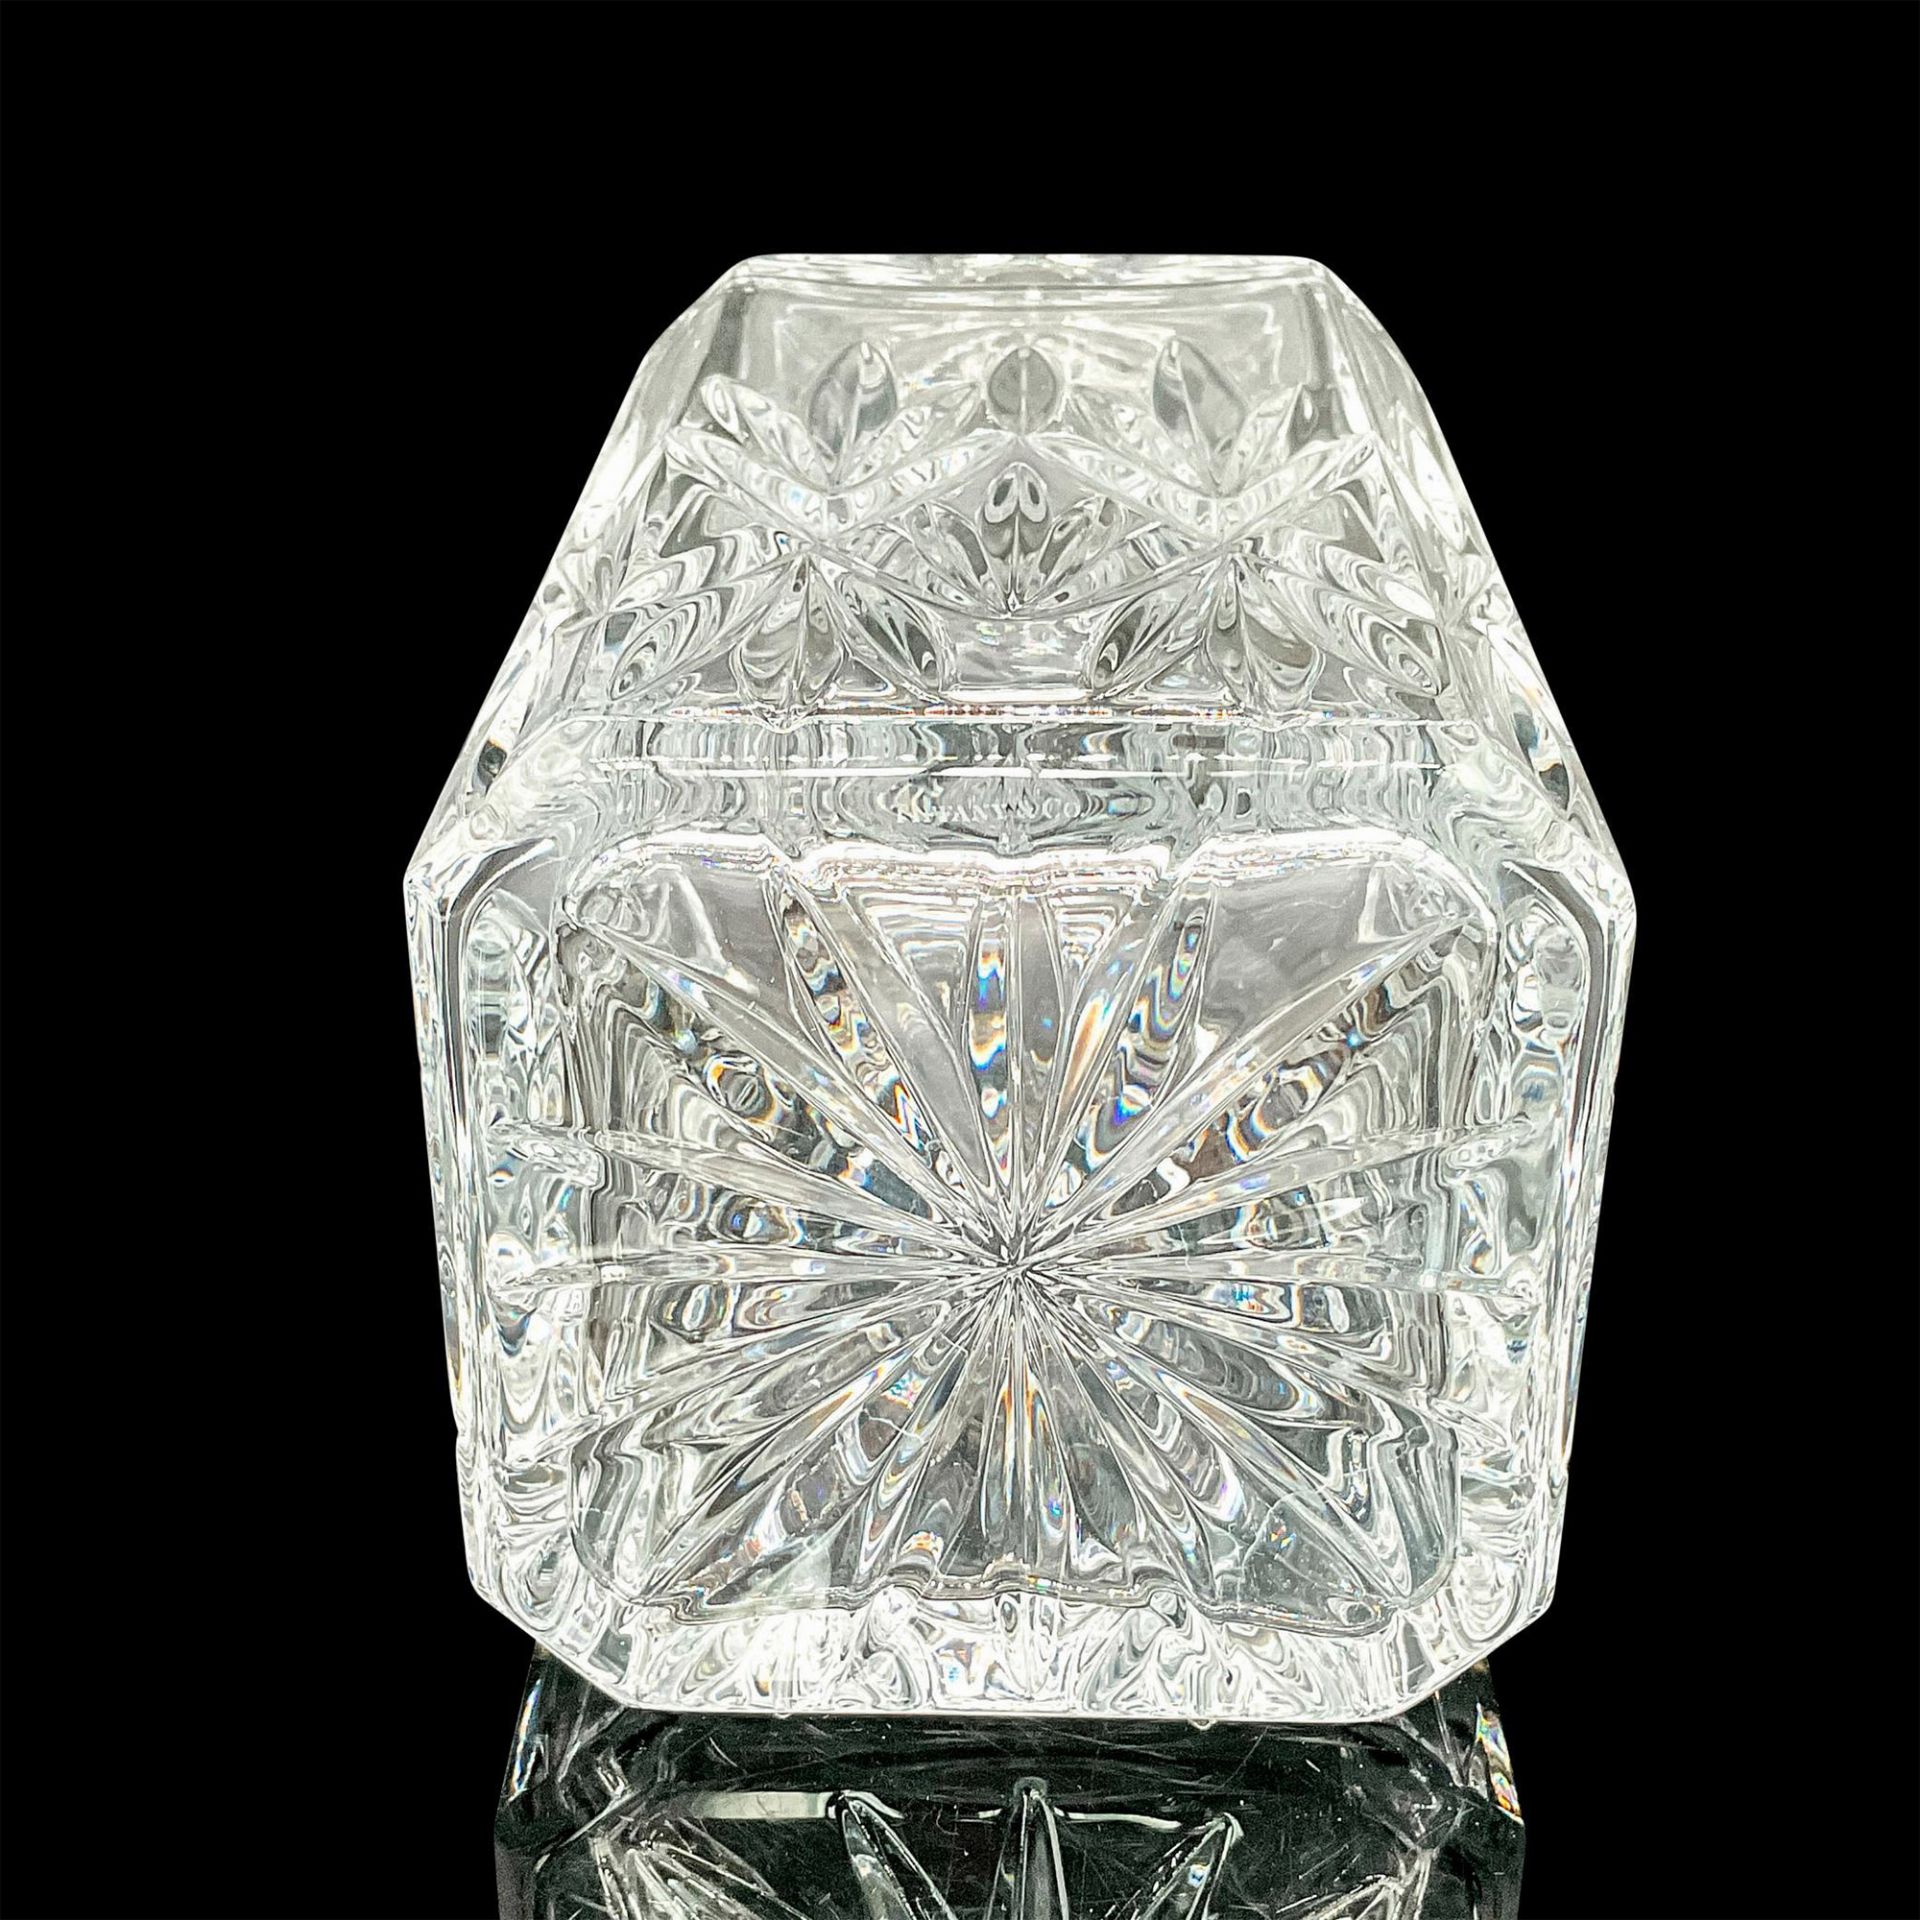 Tiffany Crystal Sybil Square Decanter with Stopper - Image 2 of 3